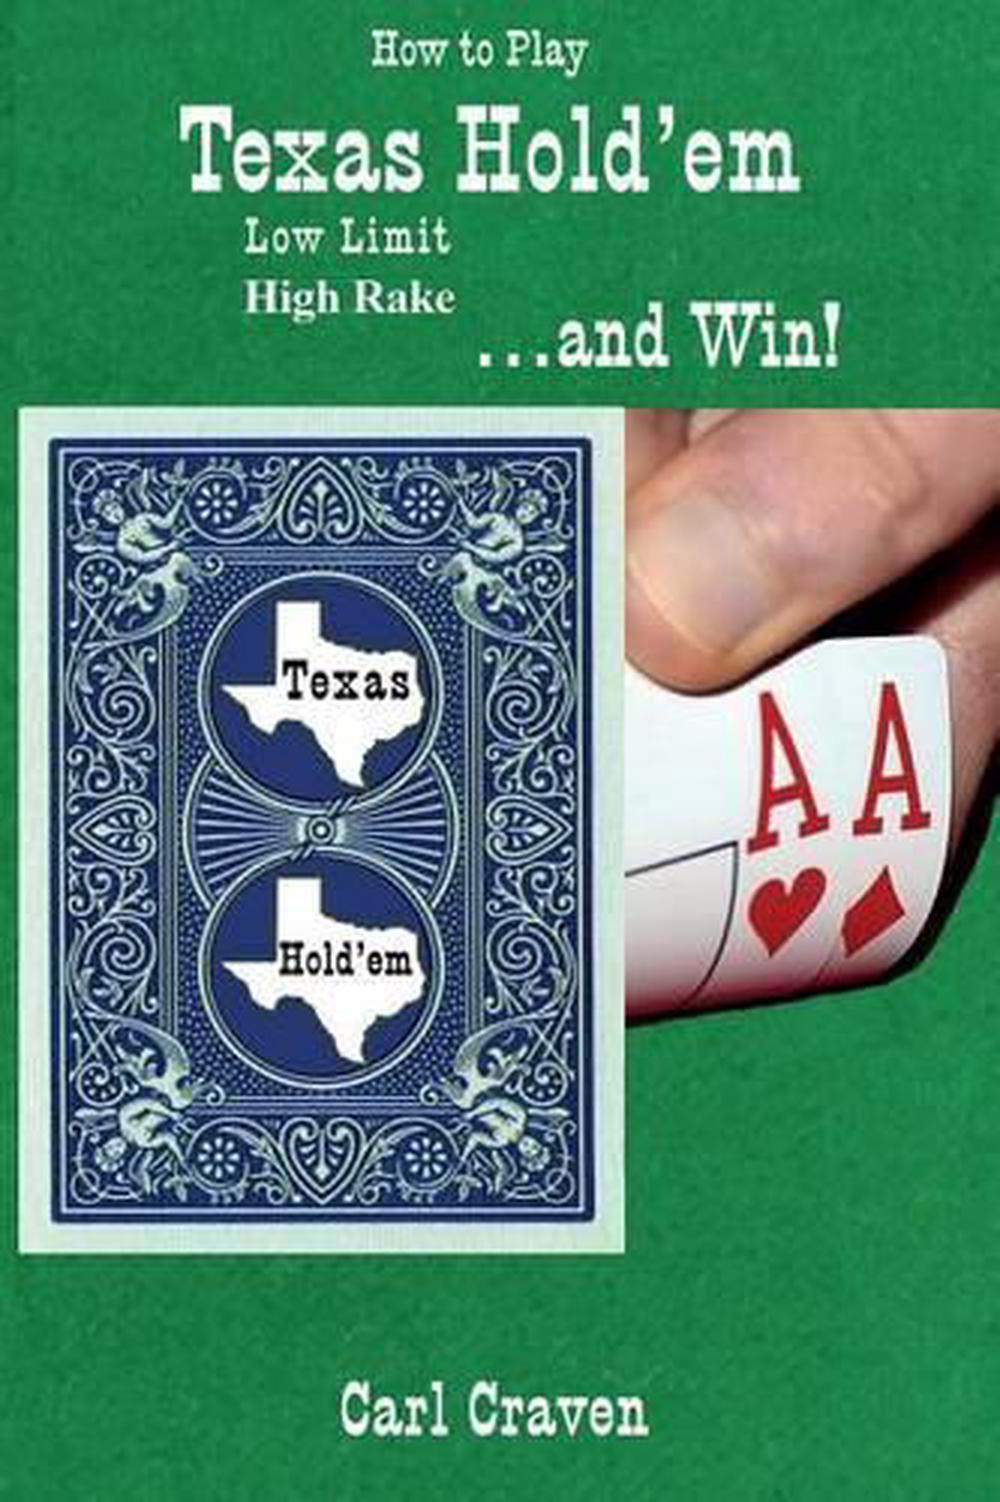 How to play texas hold them videos